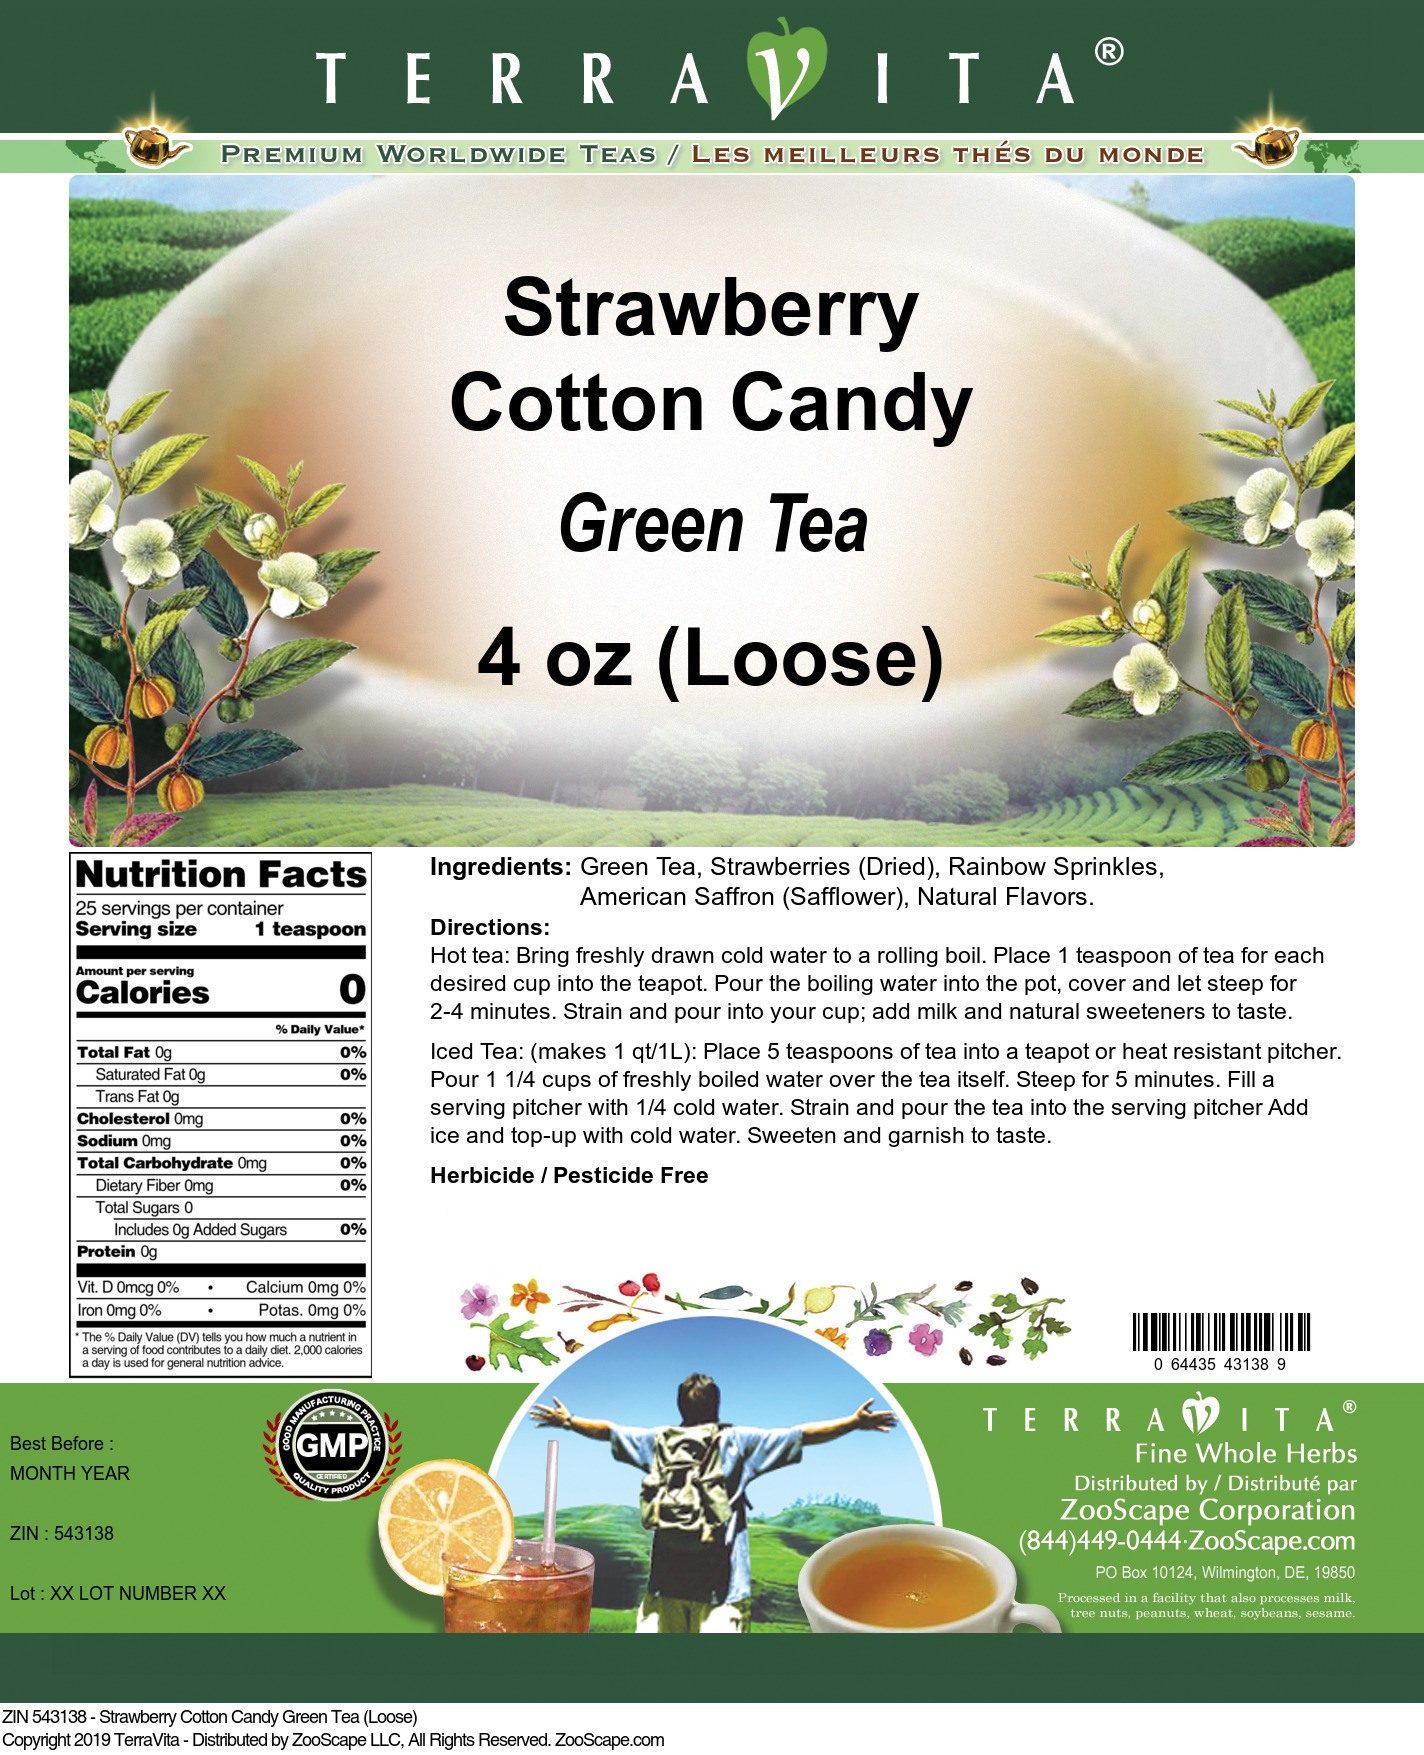 Strawberry Cotton Candy Green Tea (Loose) - Label